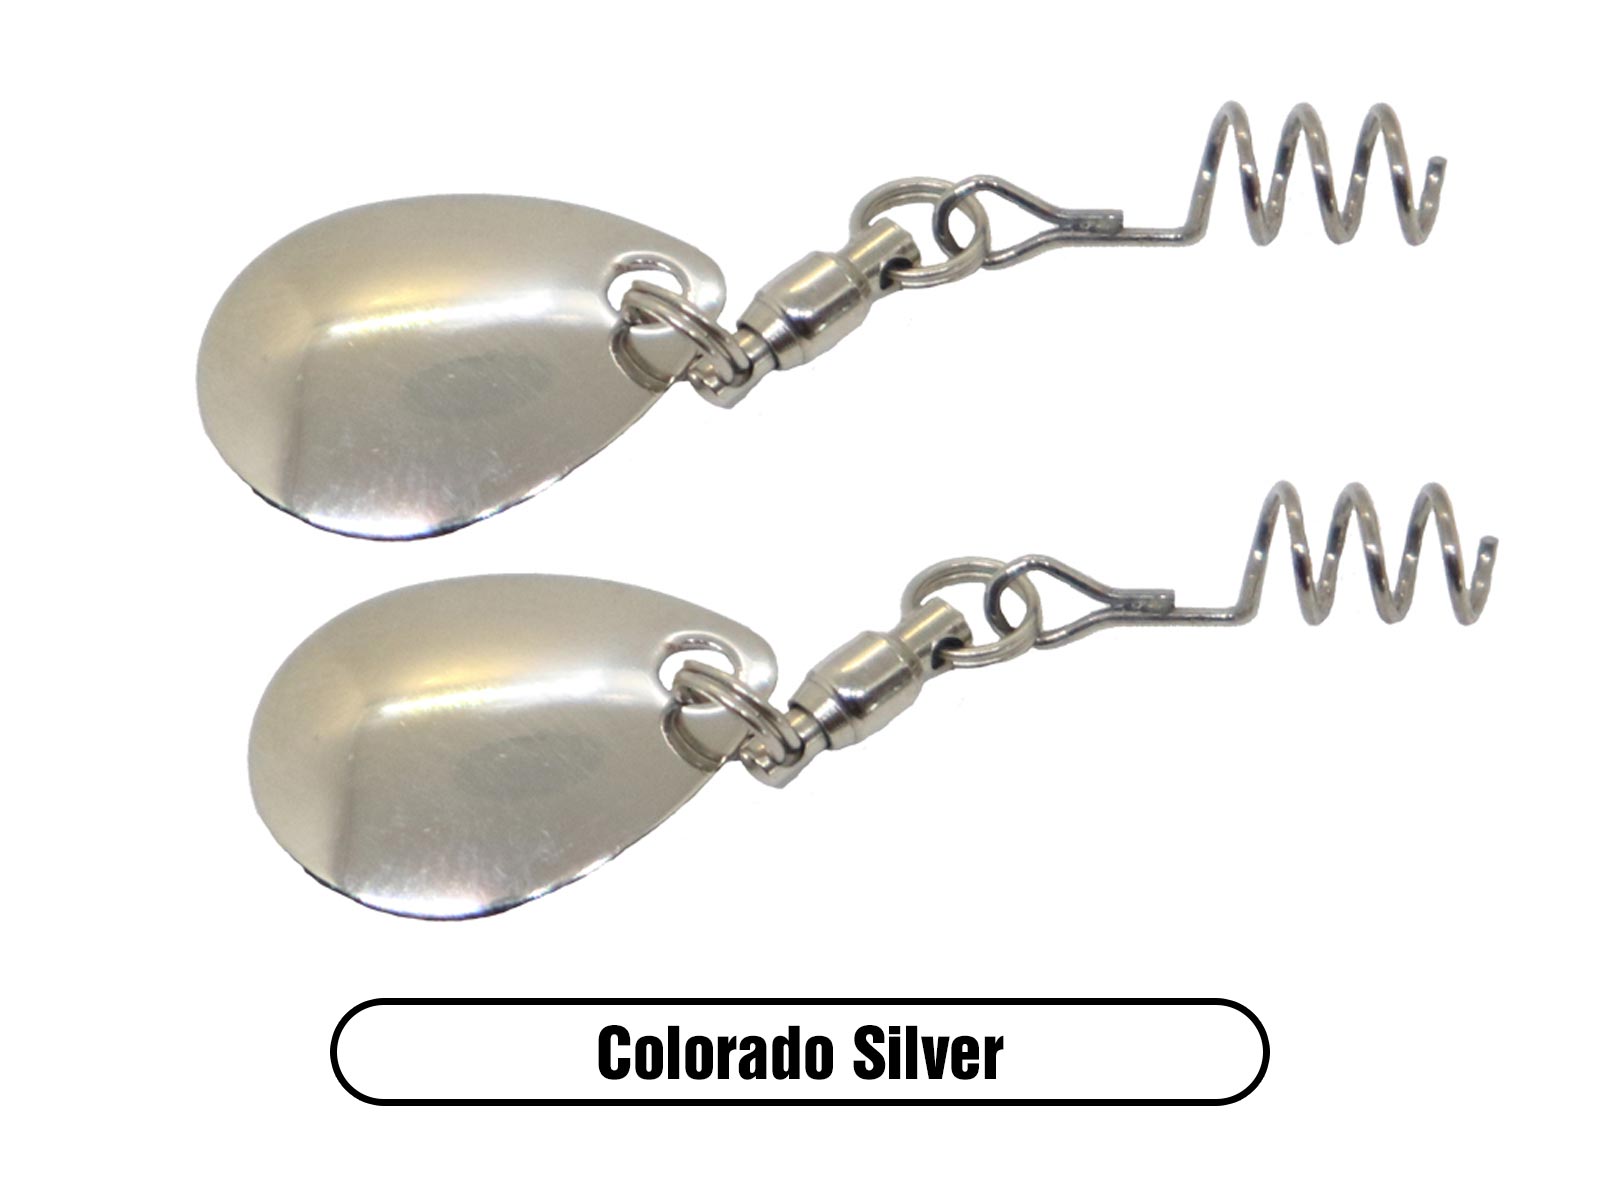 Silver Colorado Blade Spin for Largemouth Bass Fishing, Smallmouth Bass Fishing and Walleye Fishing Lure